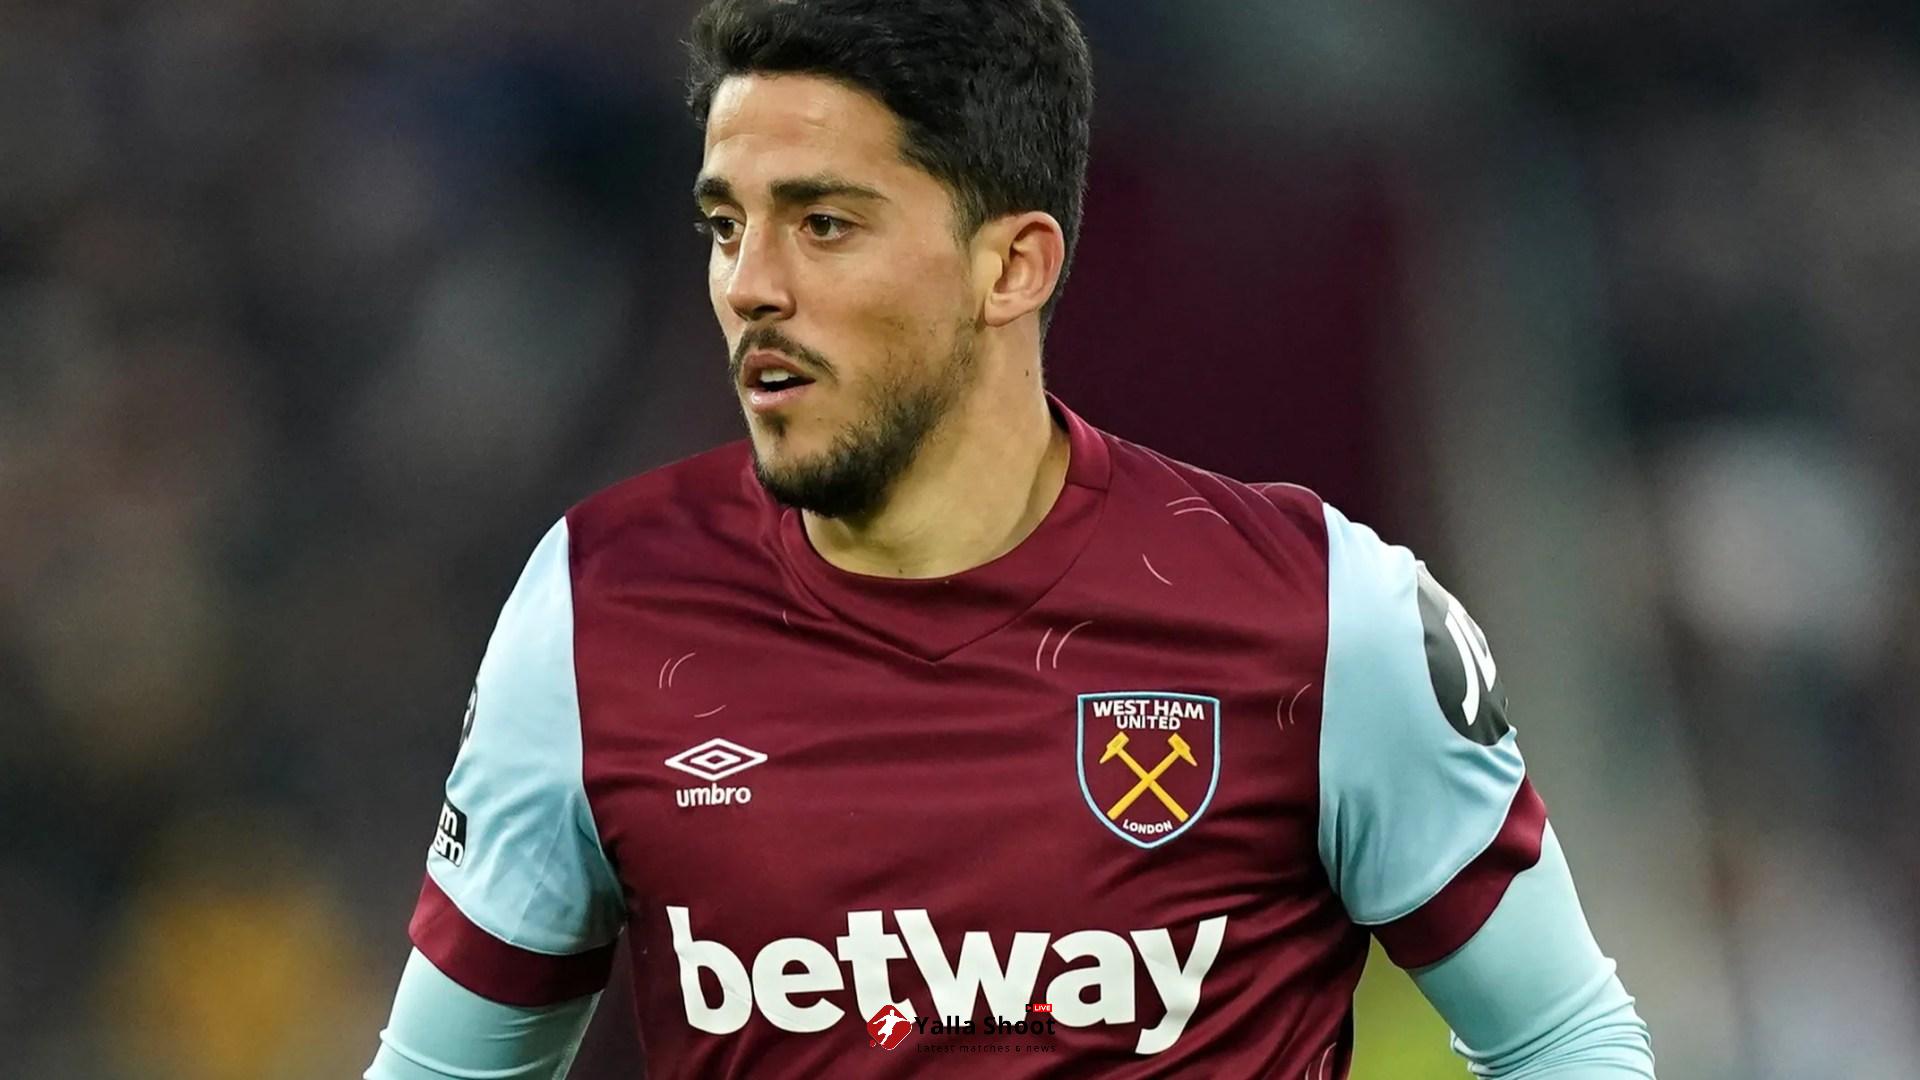 Pablo Fornals seals £7m Real Betis transfer after deadline day drama almost saw West Ham exit KO'd